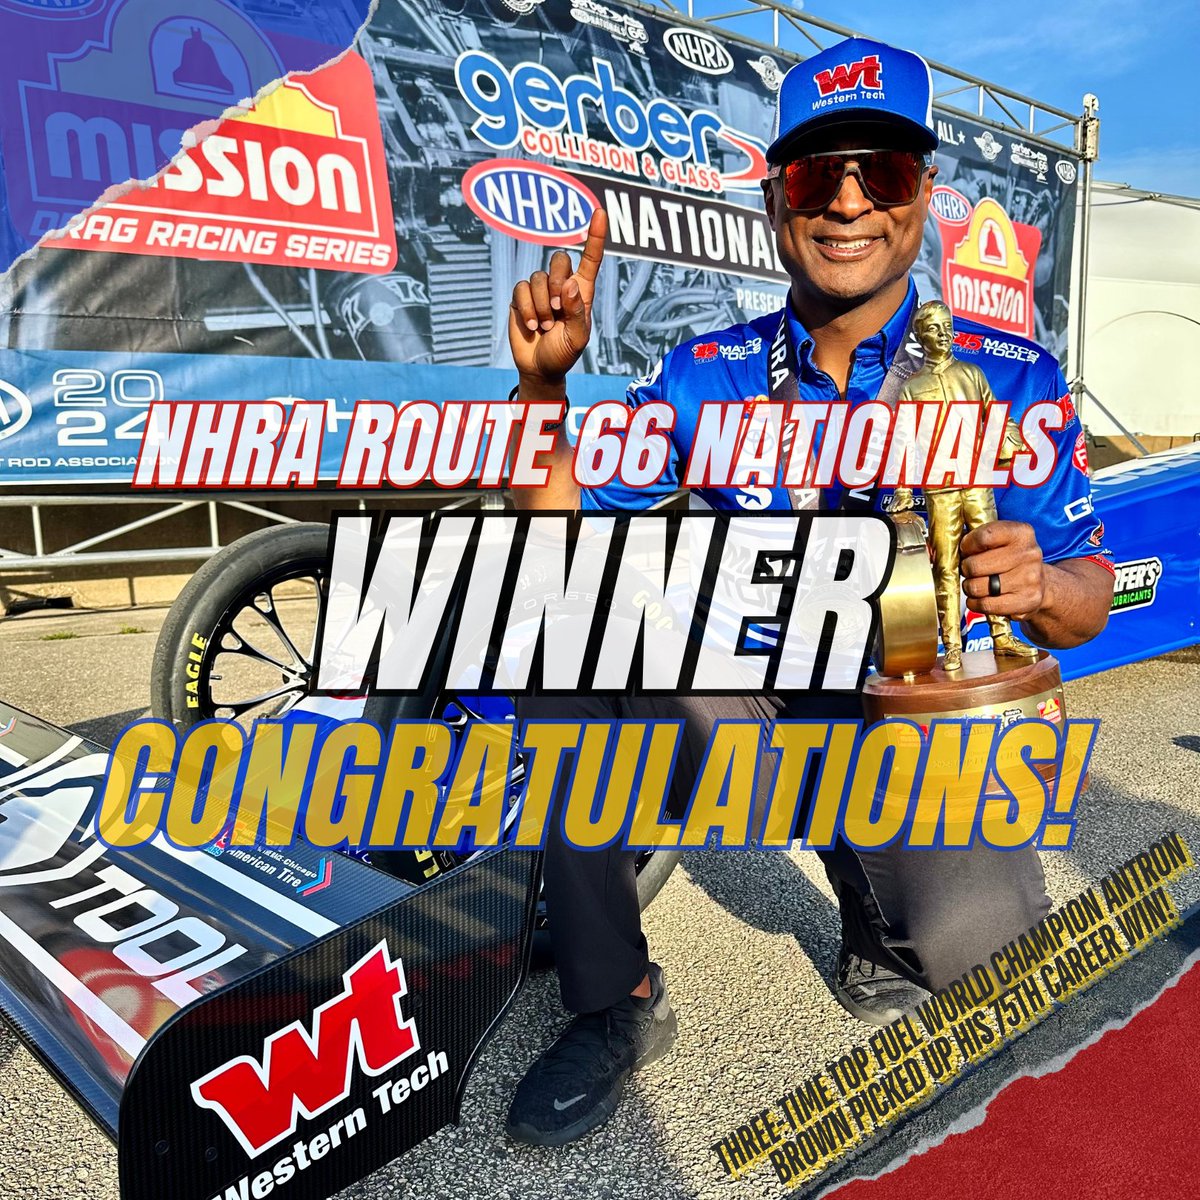 Huge congrats to @AntronBrown & Team @AbMotorsports1 on their @NHRA Route 66 win! 🎉 This marks his 75th Top Fuel race victory! We're proud sponsors and thrilled to see our performance tuning grads in the pit contributing to this success. 📸: Ted Yerzyk, ABMotorsports #NHRA